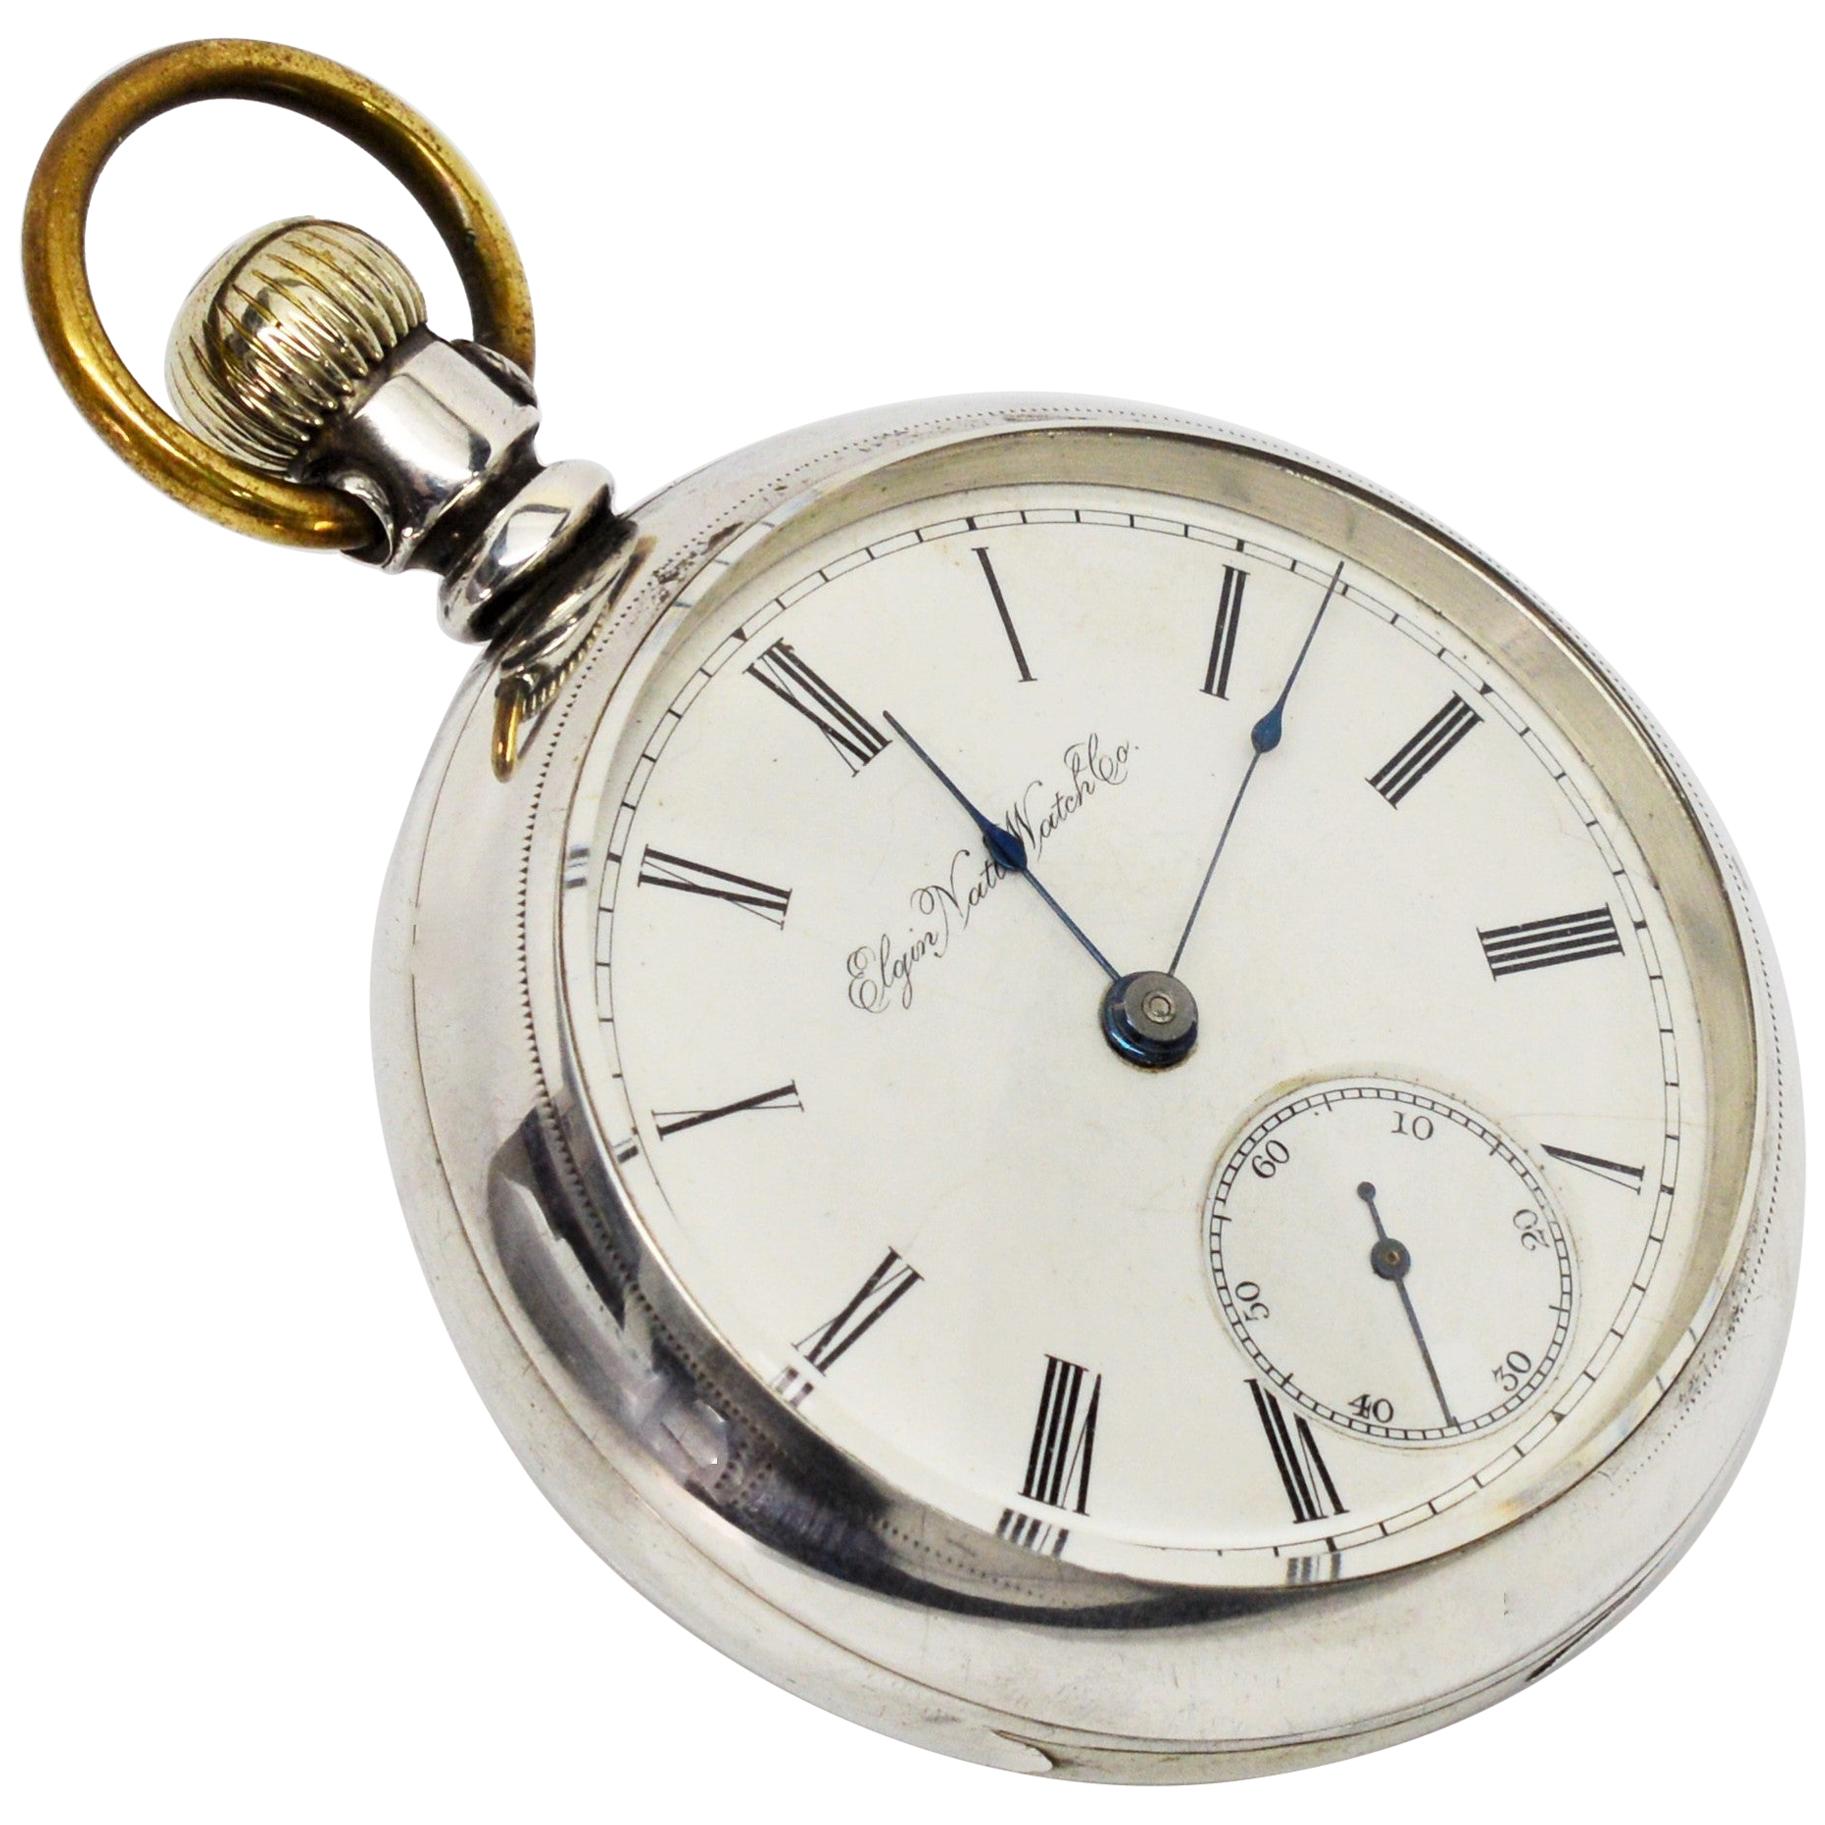 Elgin National Watch Co. Antique Pocket Watch with Gold Inlaid Back